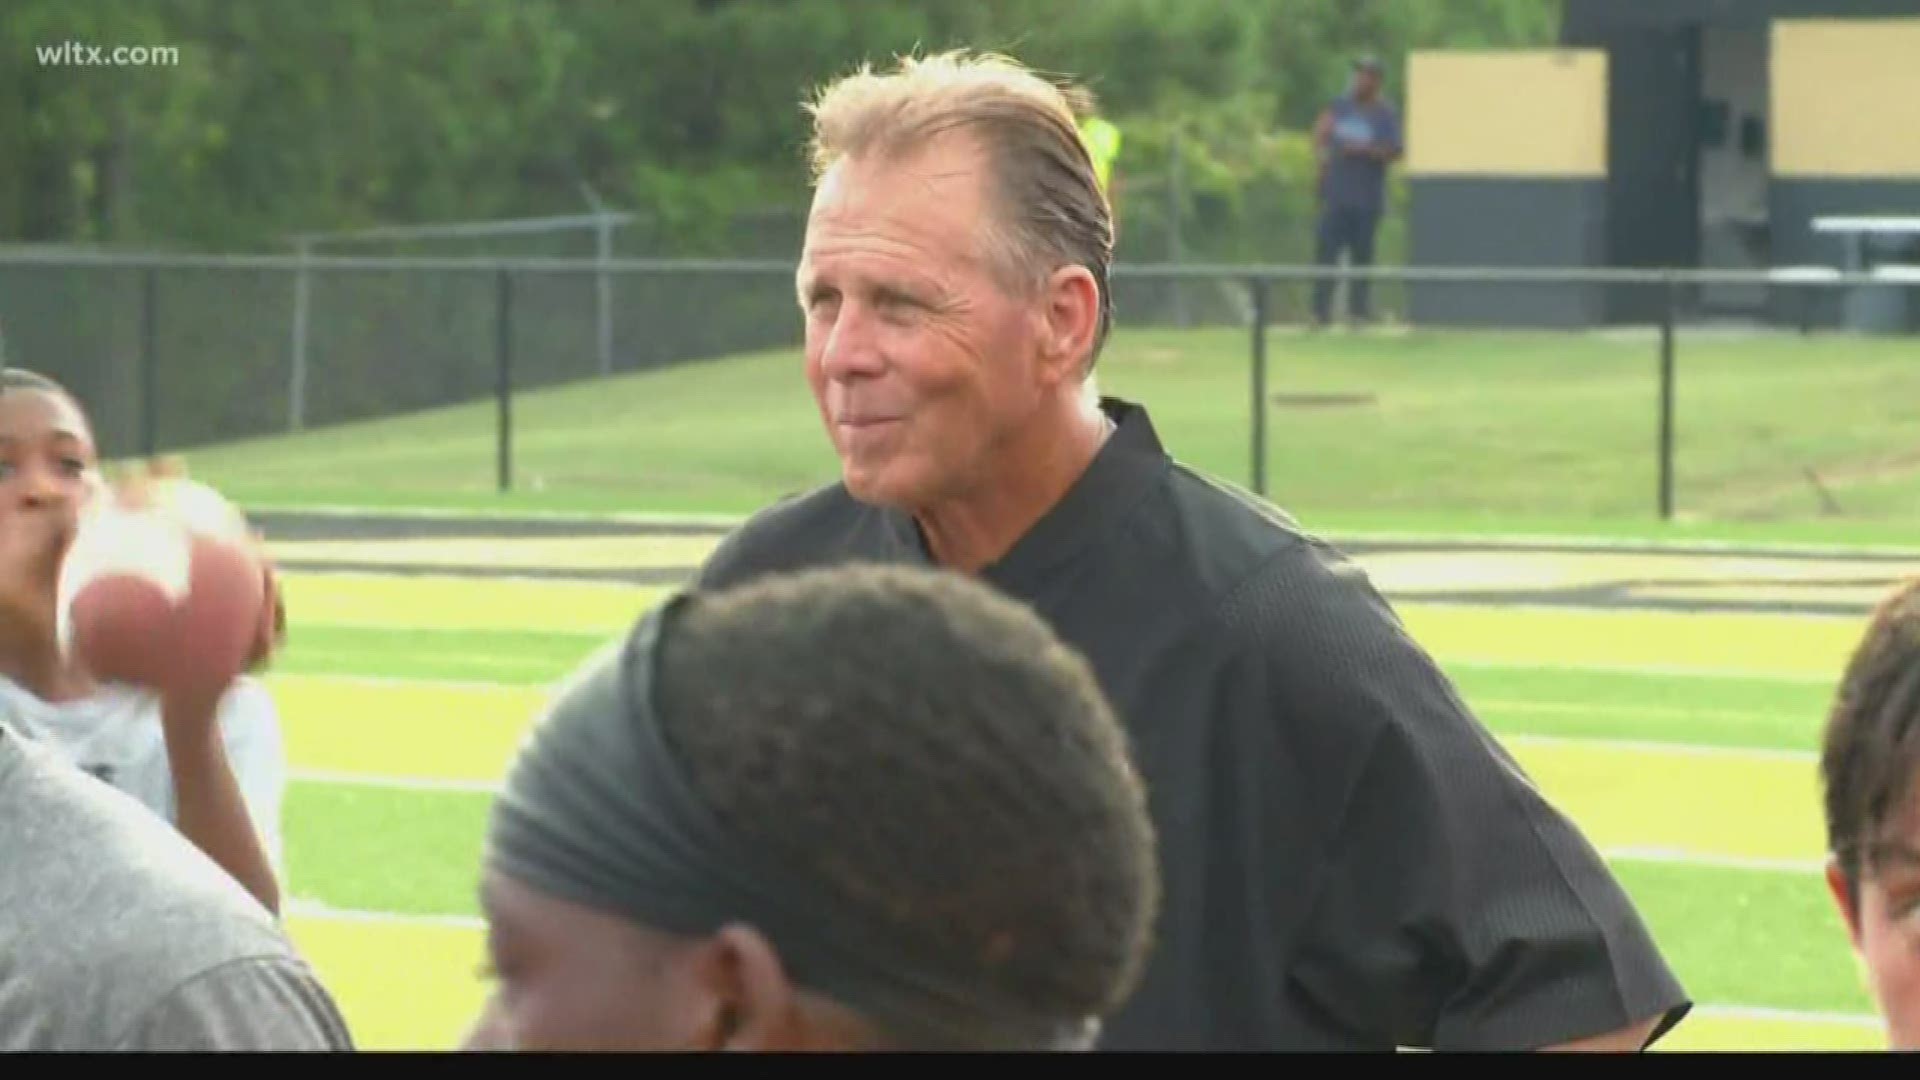 Irmo defensive coordinator Miles Aldridge has coached in all three levels of football - the NFL, college and now he has settled into the high school ranks where he is teaching the youngest of kids how to block and tackle.